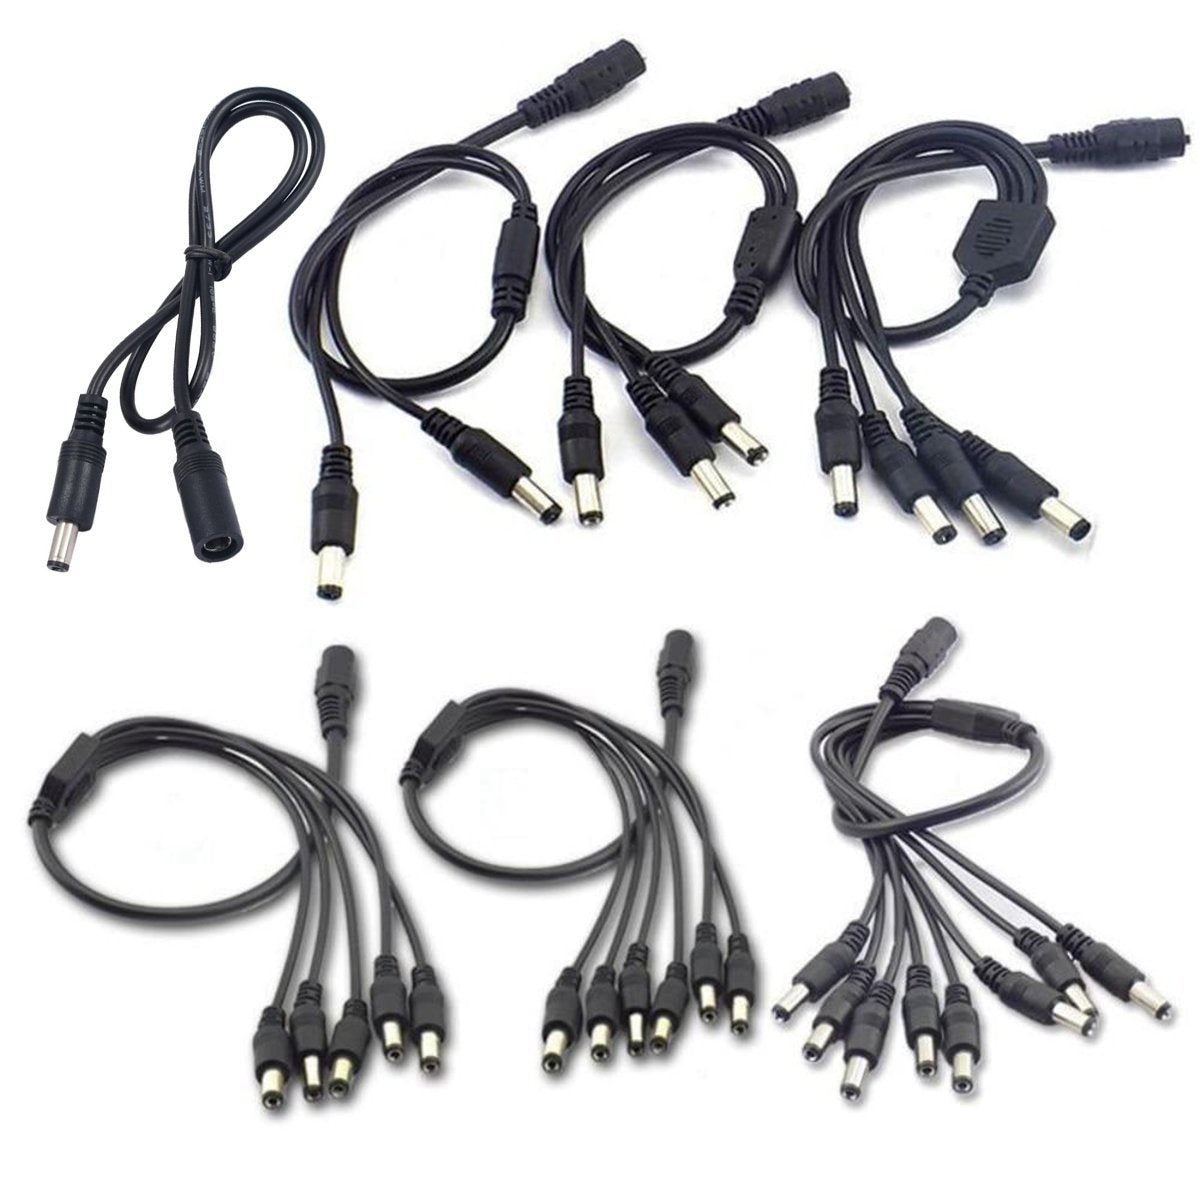 RAD 5-way Power Splitter Cable for Roland Boutique  Rubadub